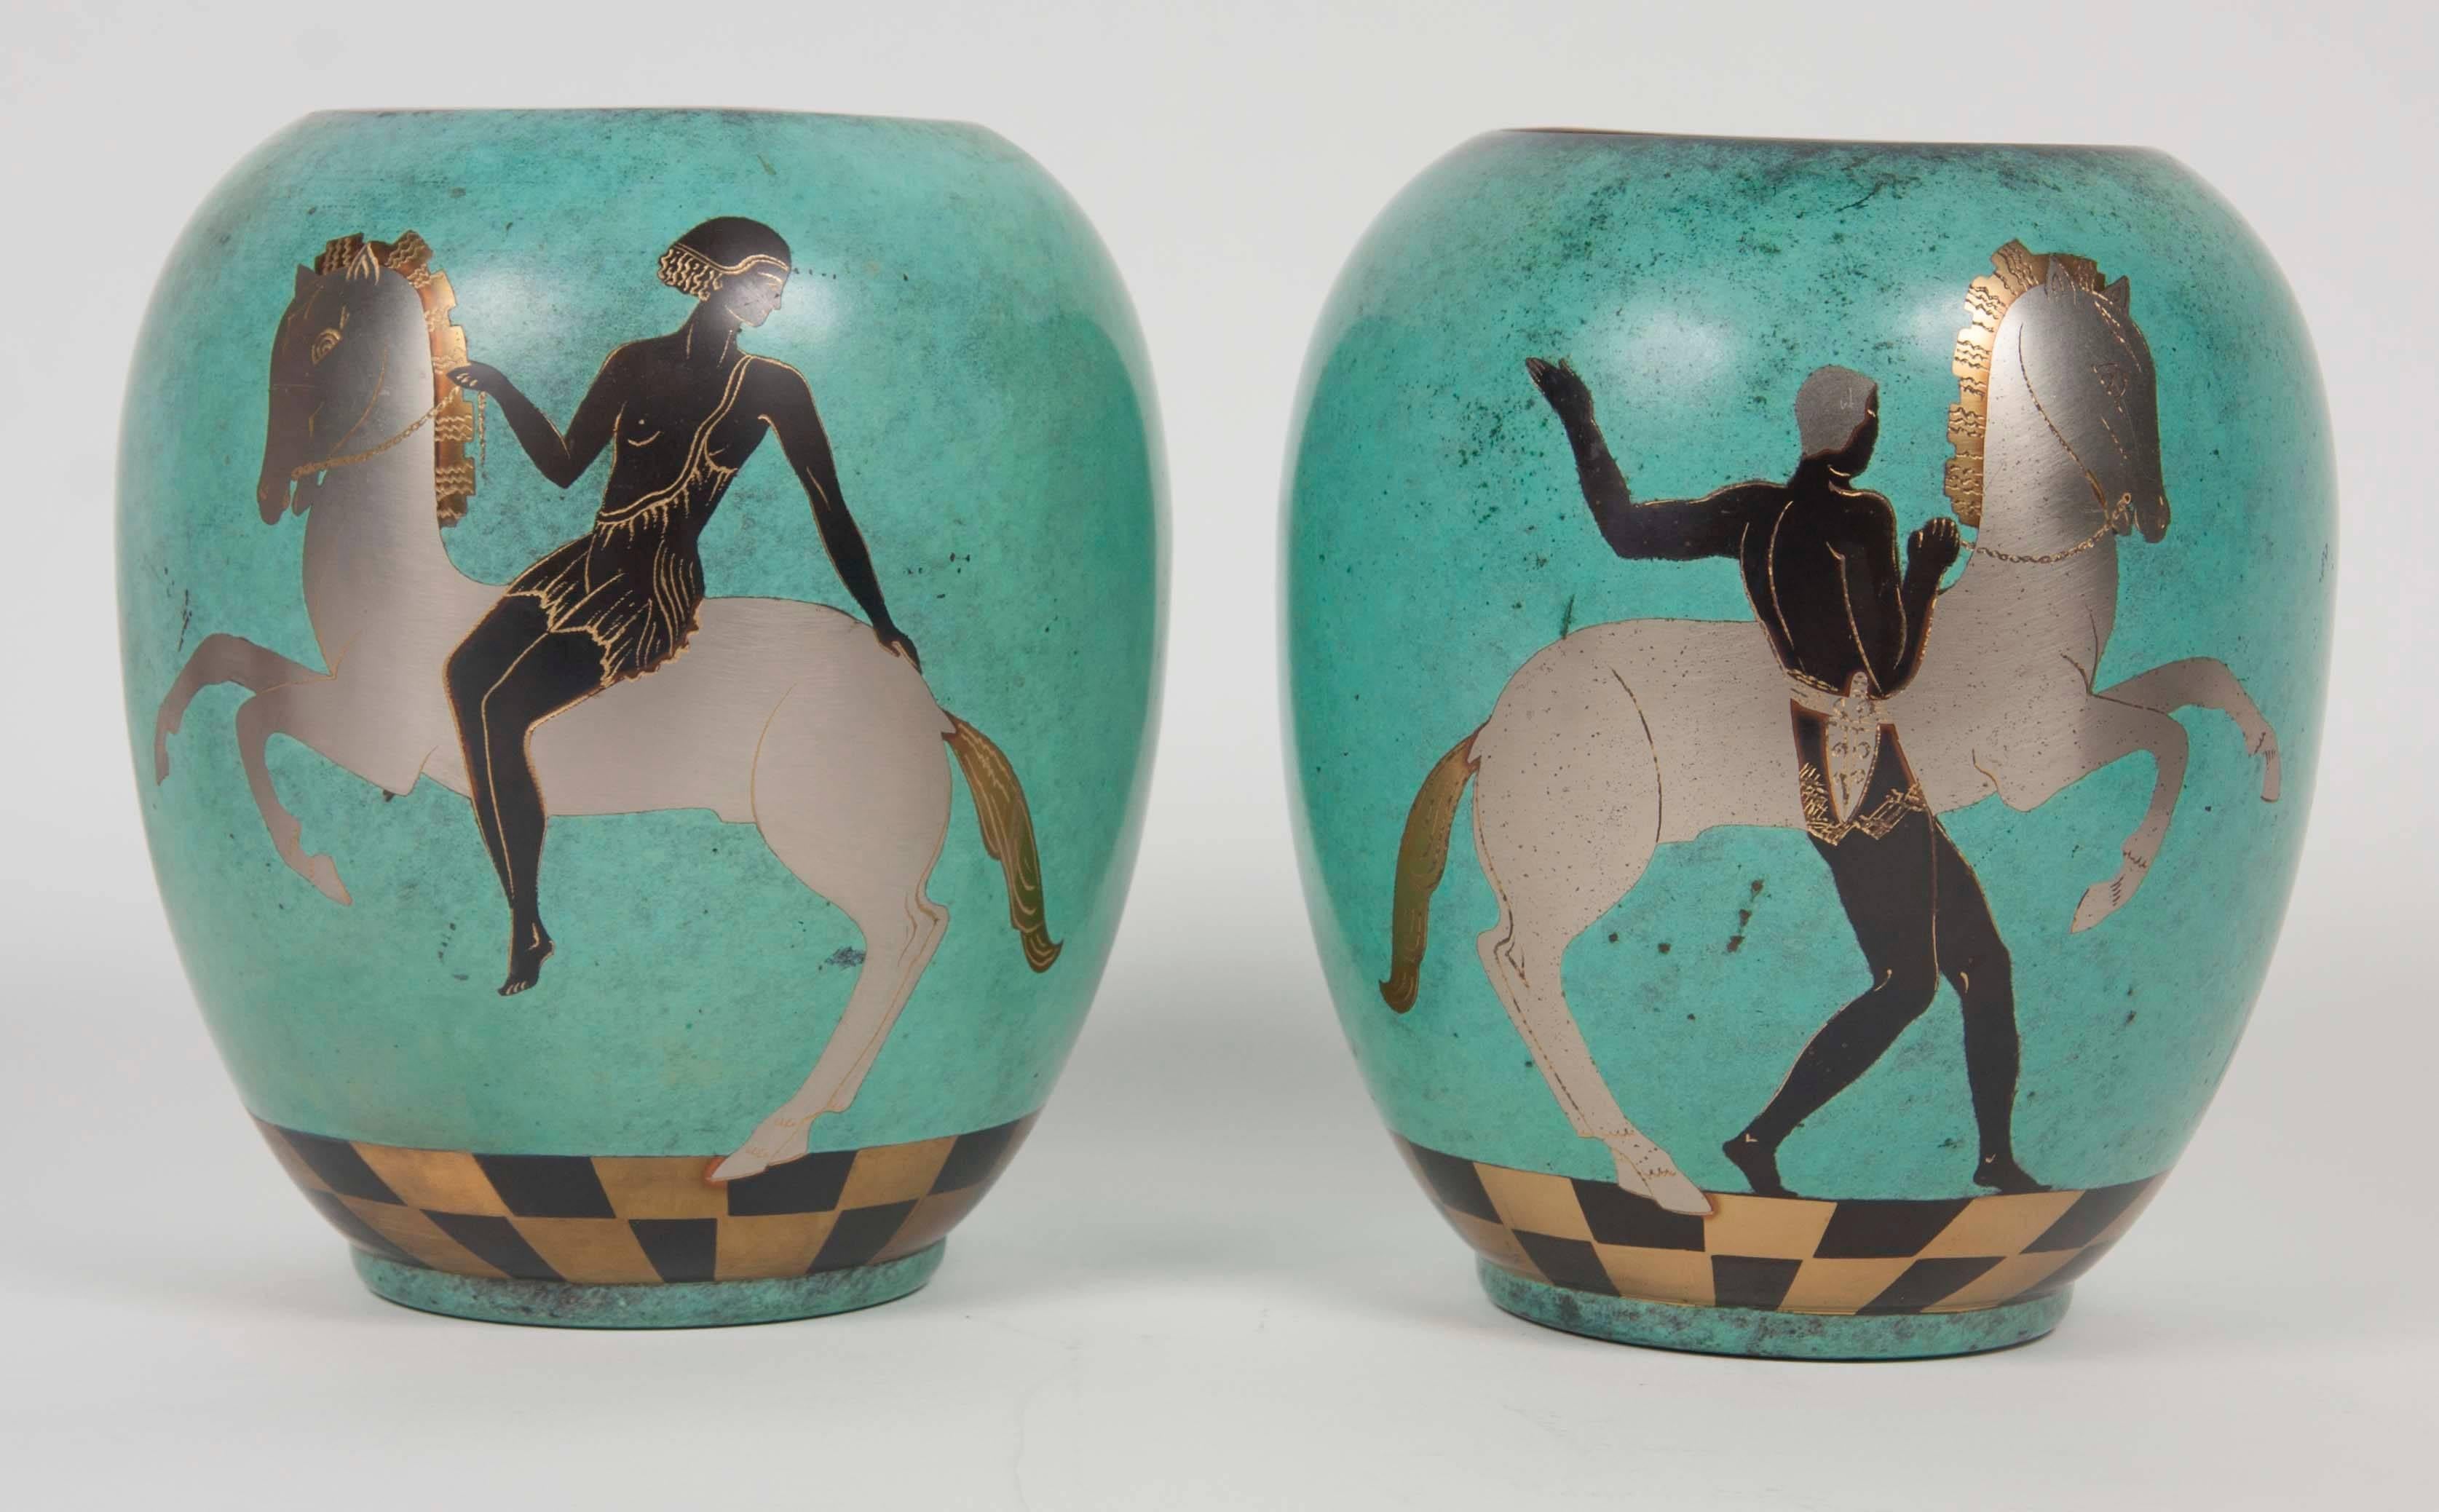 A pair of WMF enamel on copper vases of turquoise with silver, black and gold decoration of mythological figures; one depicting a man with horse, the other a woman riding a horse.